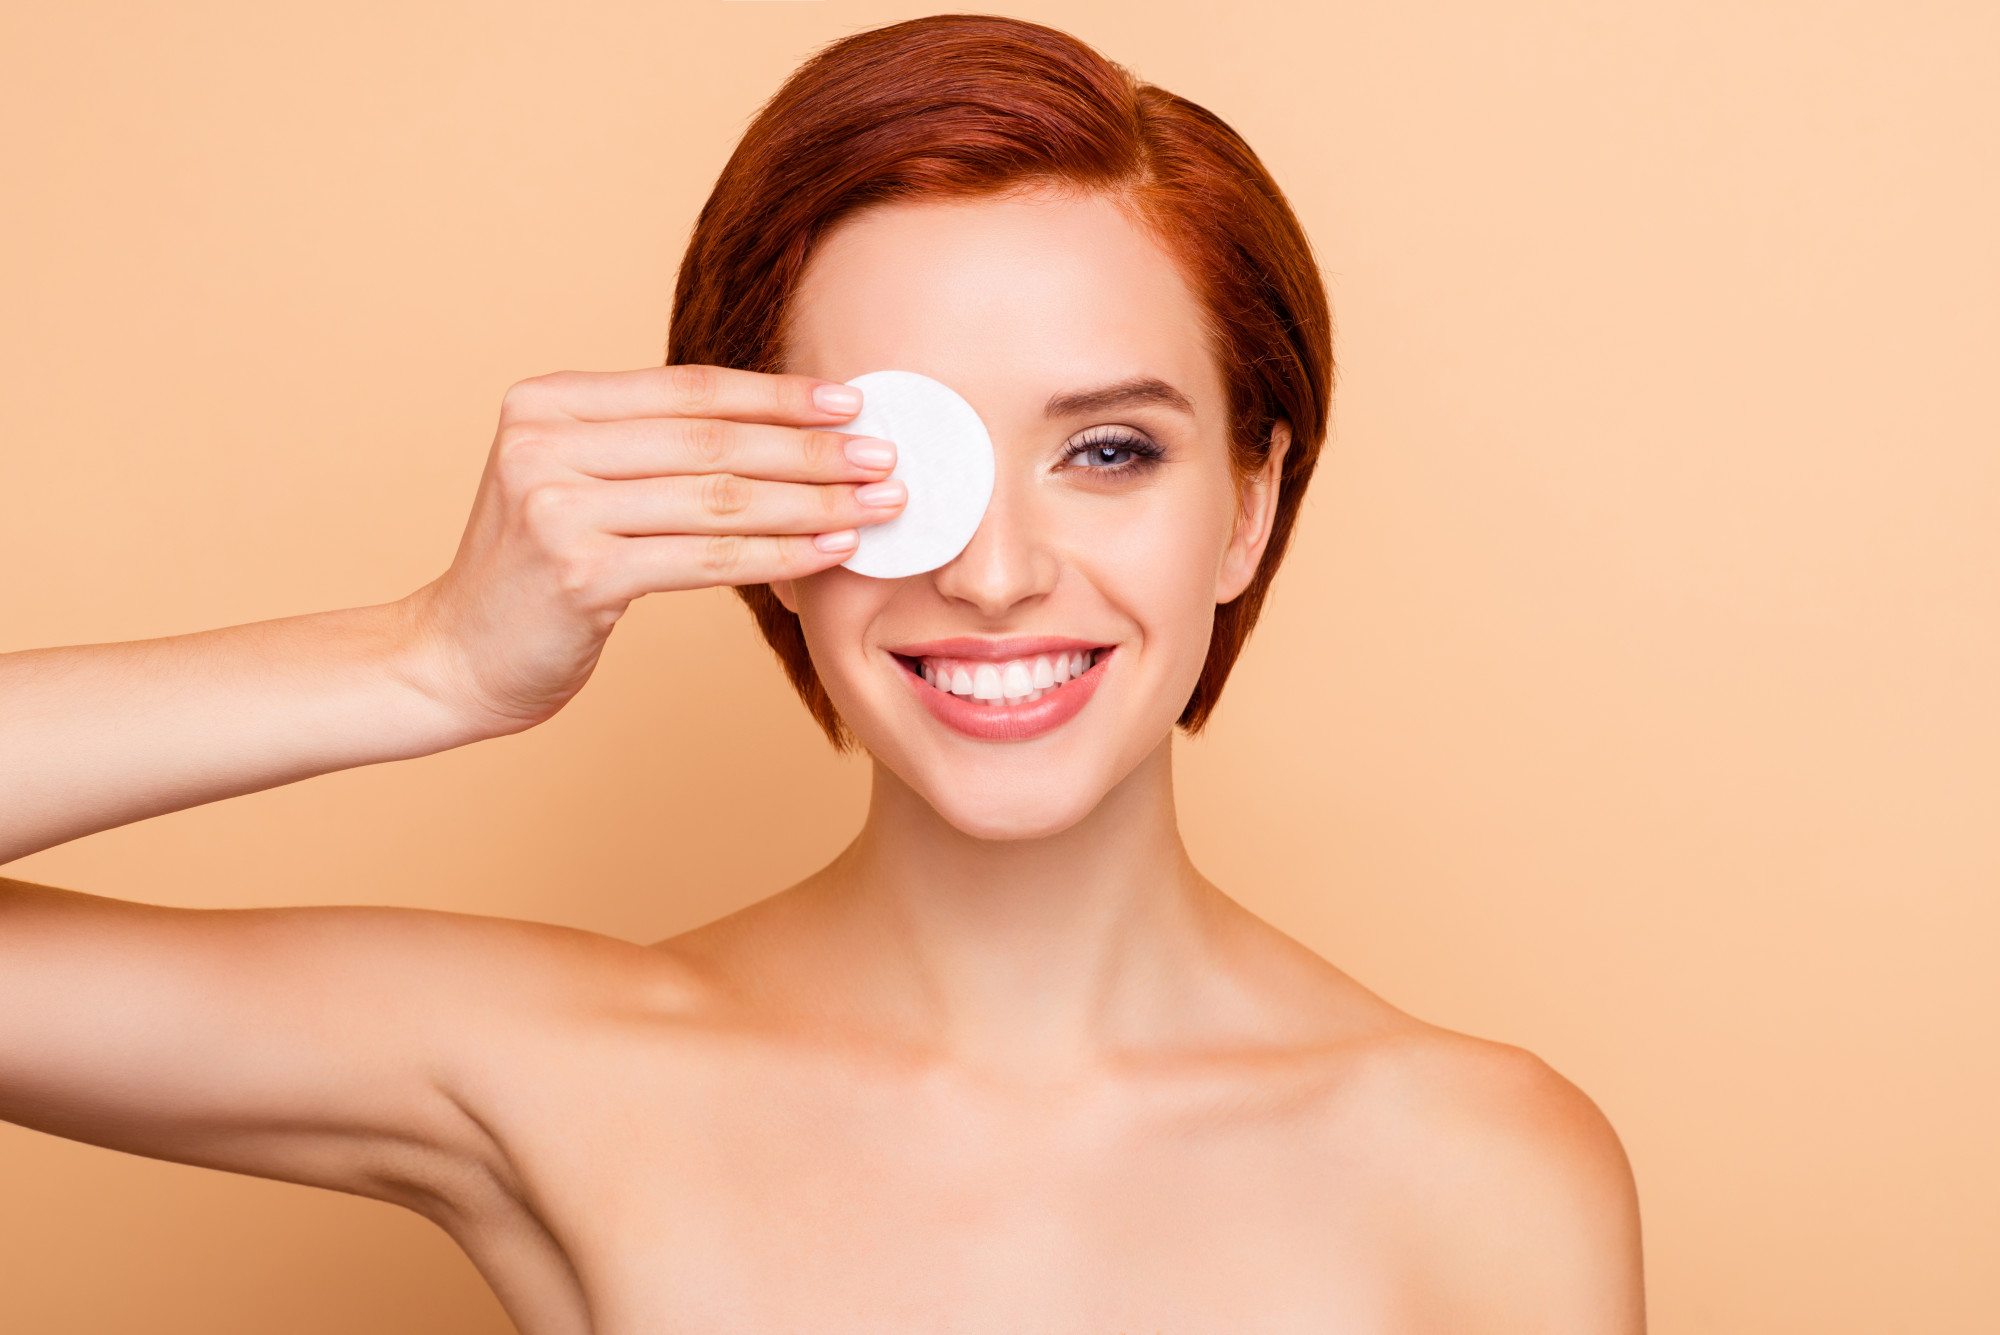 The sensitive skin under your eyes can be easily damaged by certain types of chemicals. Here's what you need to know to find the best eye makeup remover.